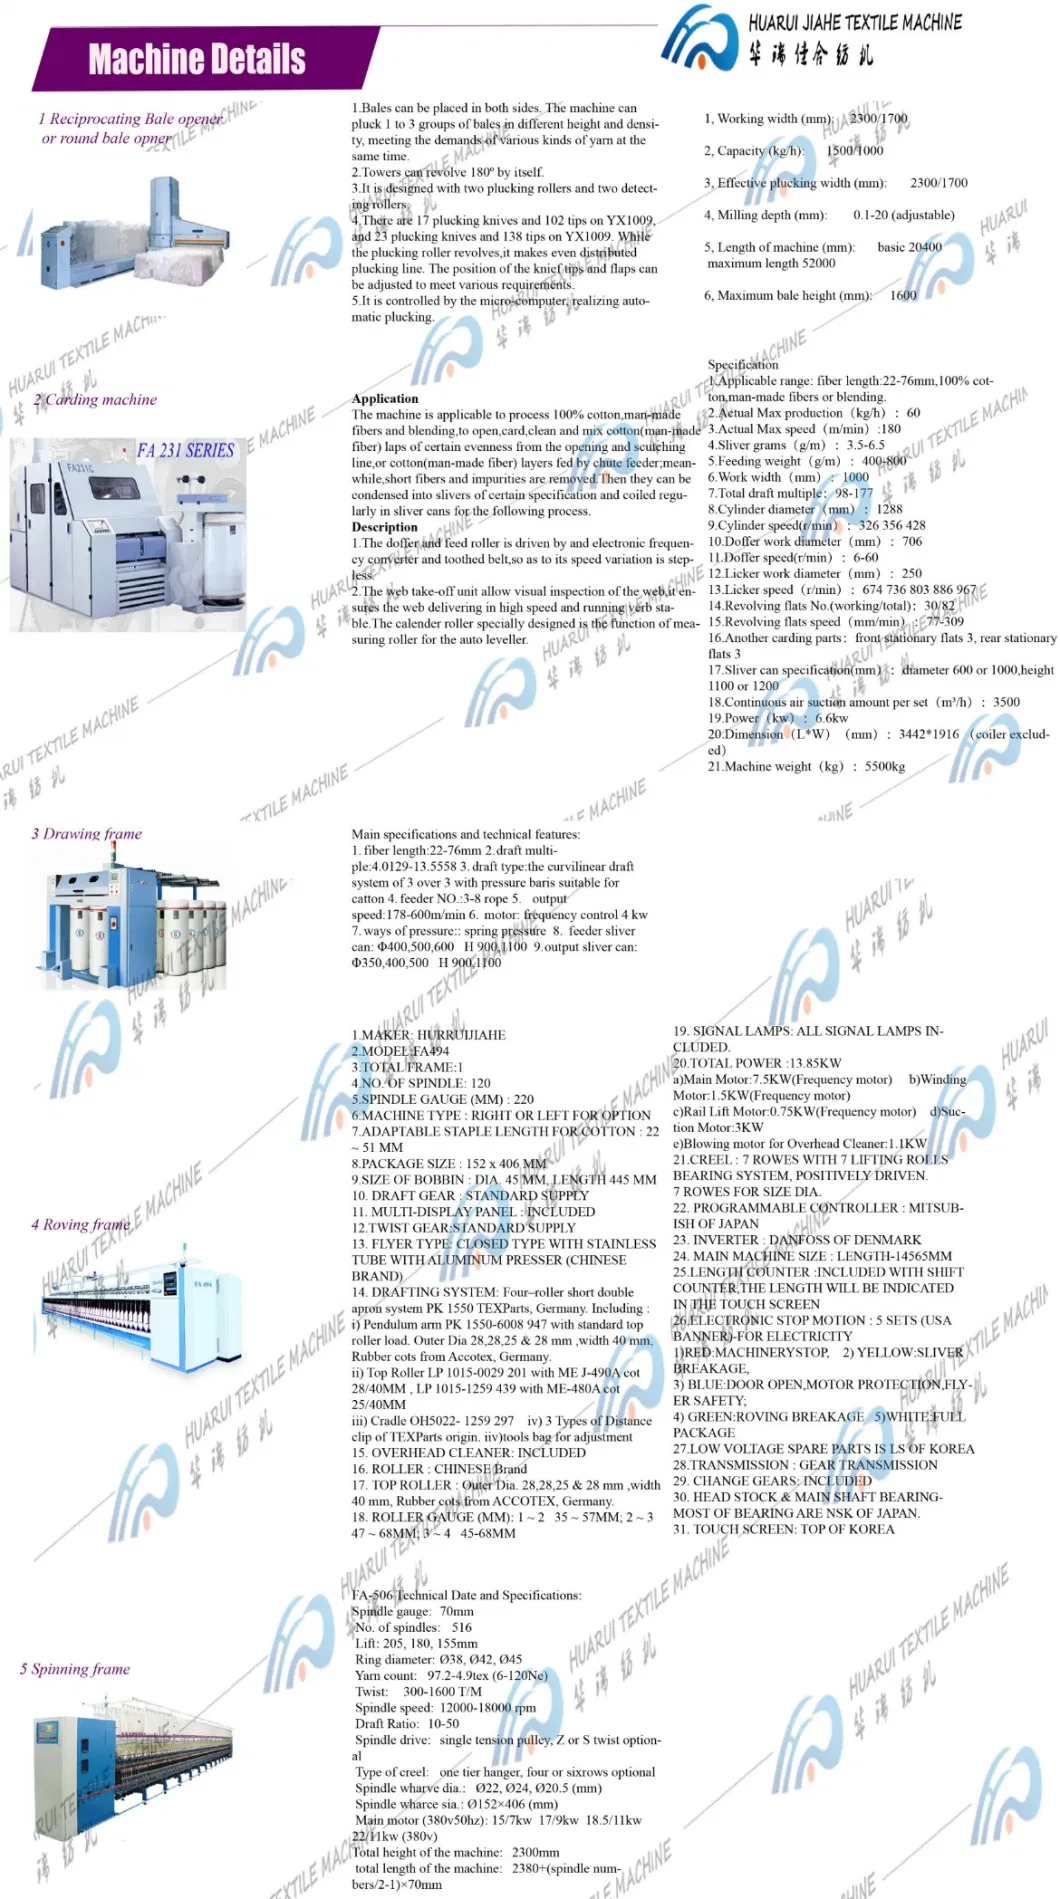 Yarn Setting Machine [Recommended by Customer, Price Negotiable] Fast, High Temperature and High Efficiency Package Yarn Dryer, Setting Machine